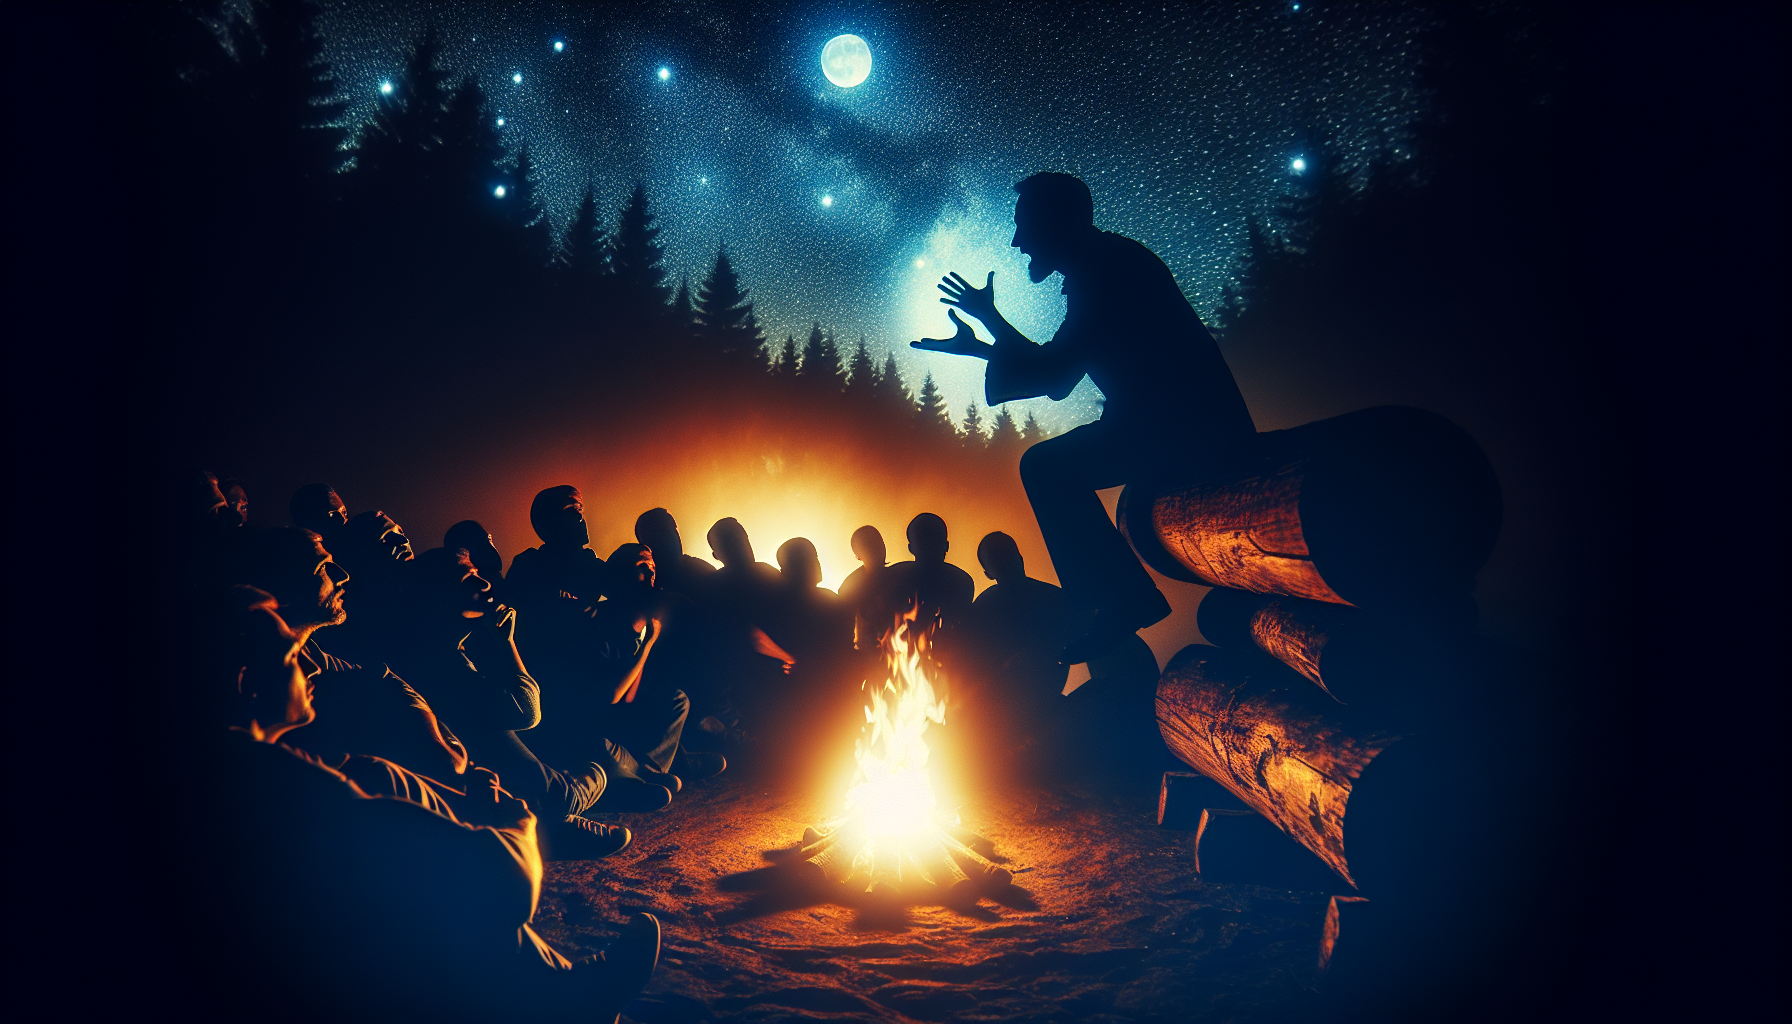 Incorporating Storytelling Techniques: A storytelling scene with a silhouette of a person narrating a story to a captivated audience around a campfire.